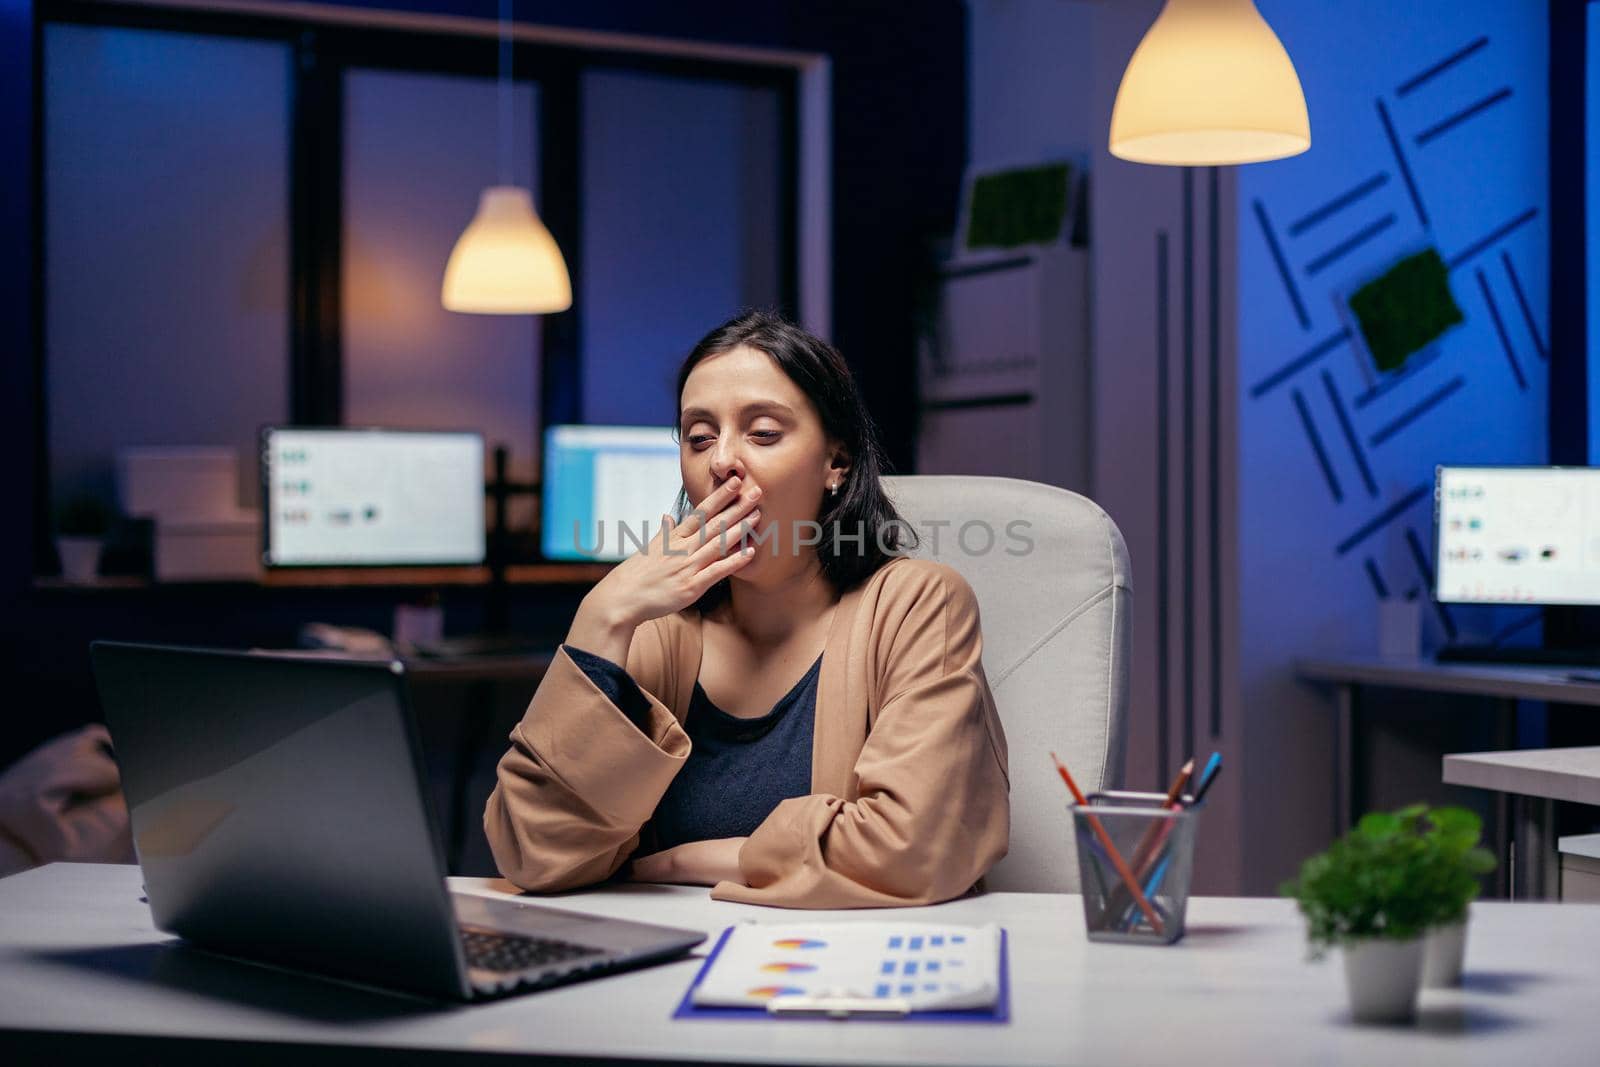 Sleepy businesswoman yawns while working on laptop by DCStudio